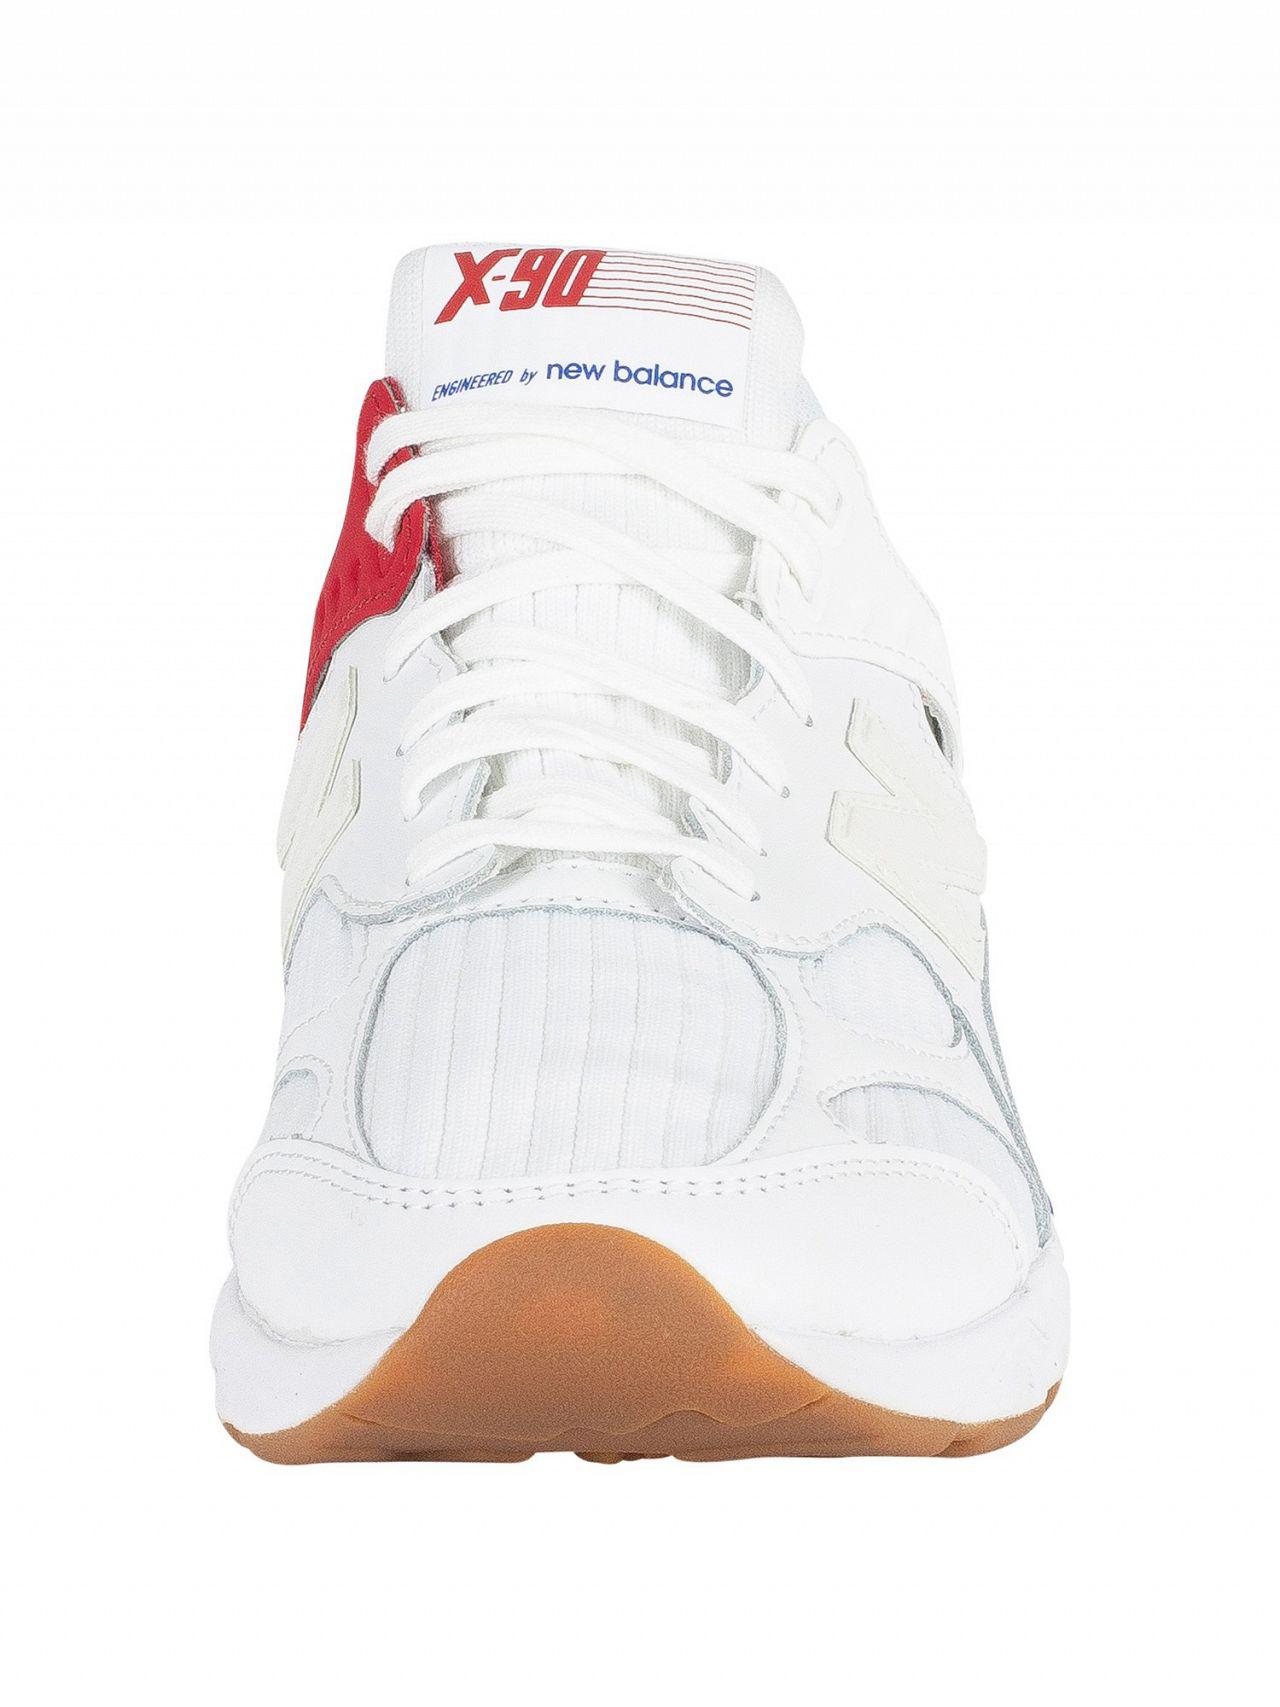 New Balance Suede White/blue/red X-90 Trainers for Men - Lyst